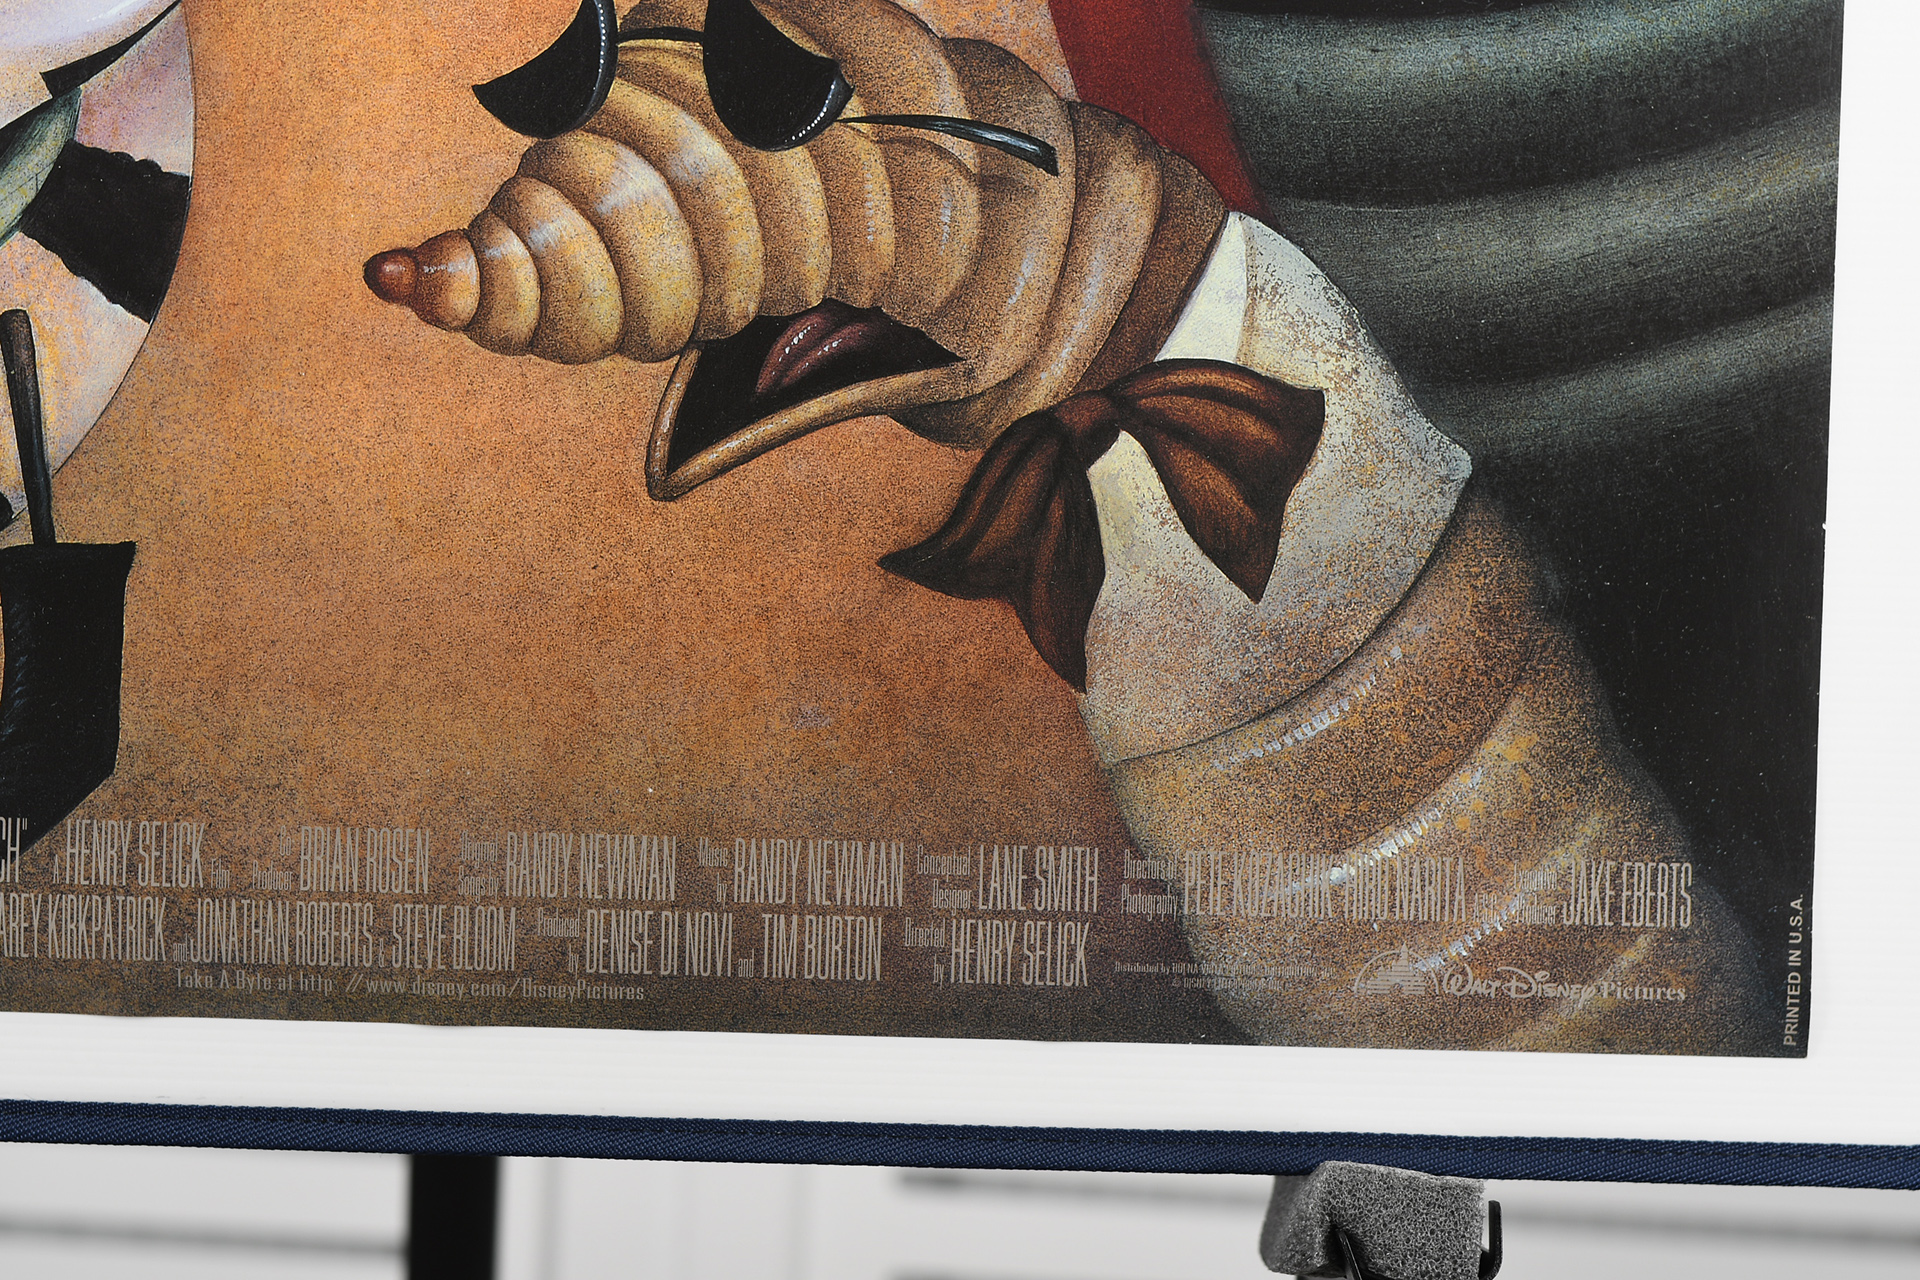 Cinema Poster from ""James and the Giant Peach"" - Image 3 of 6